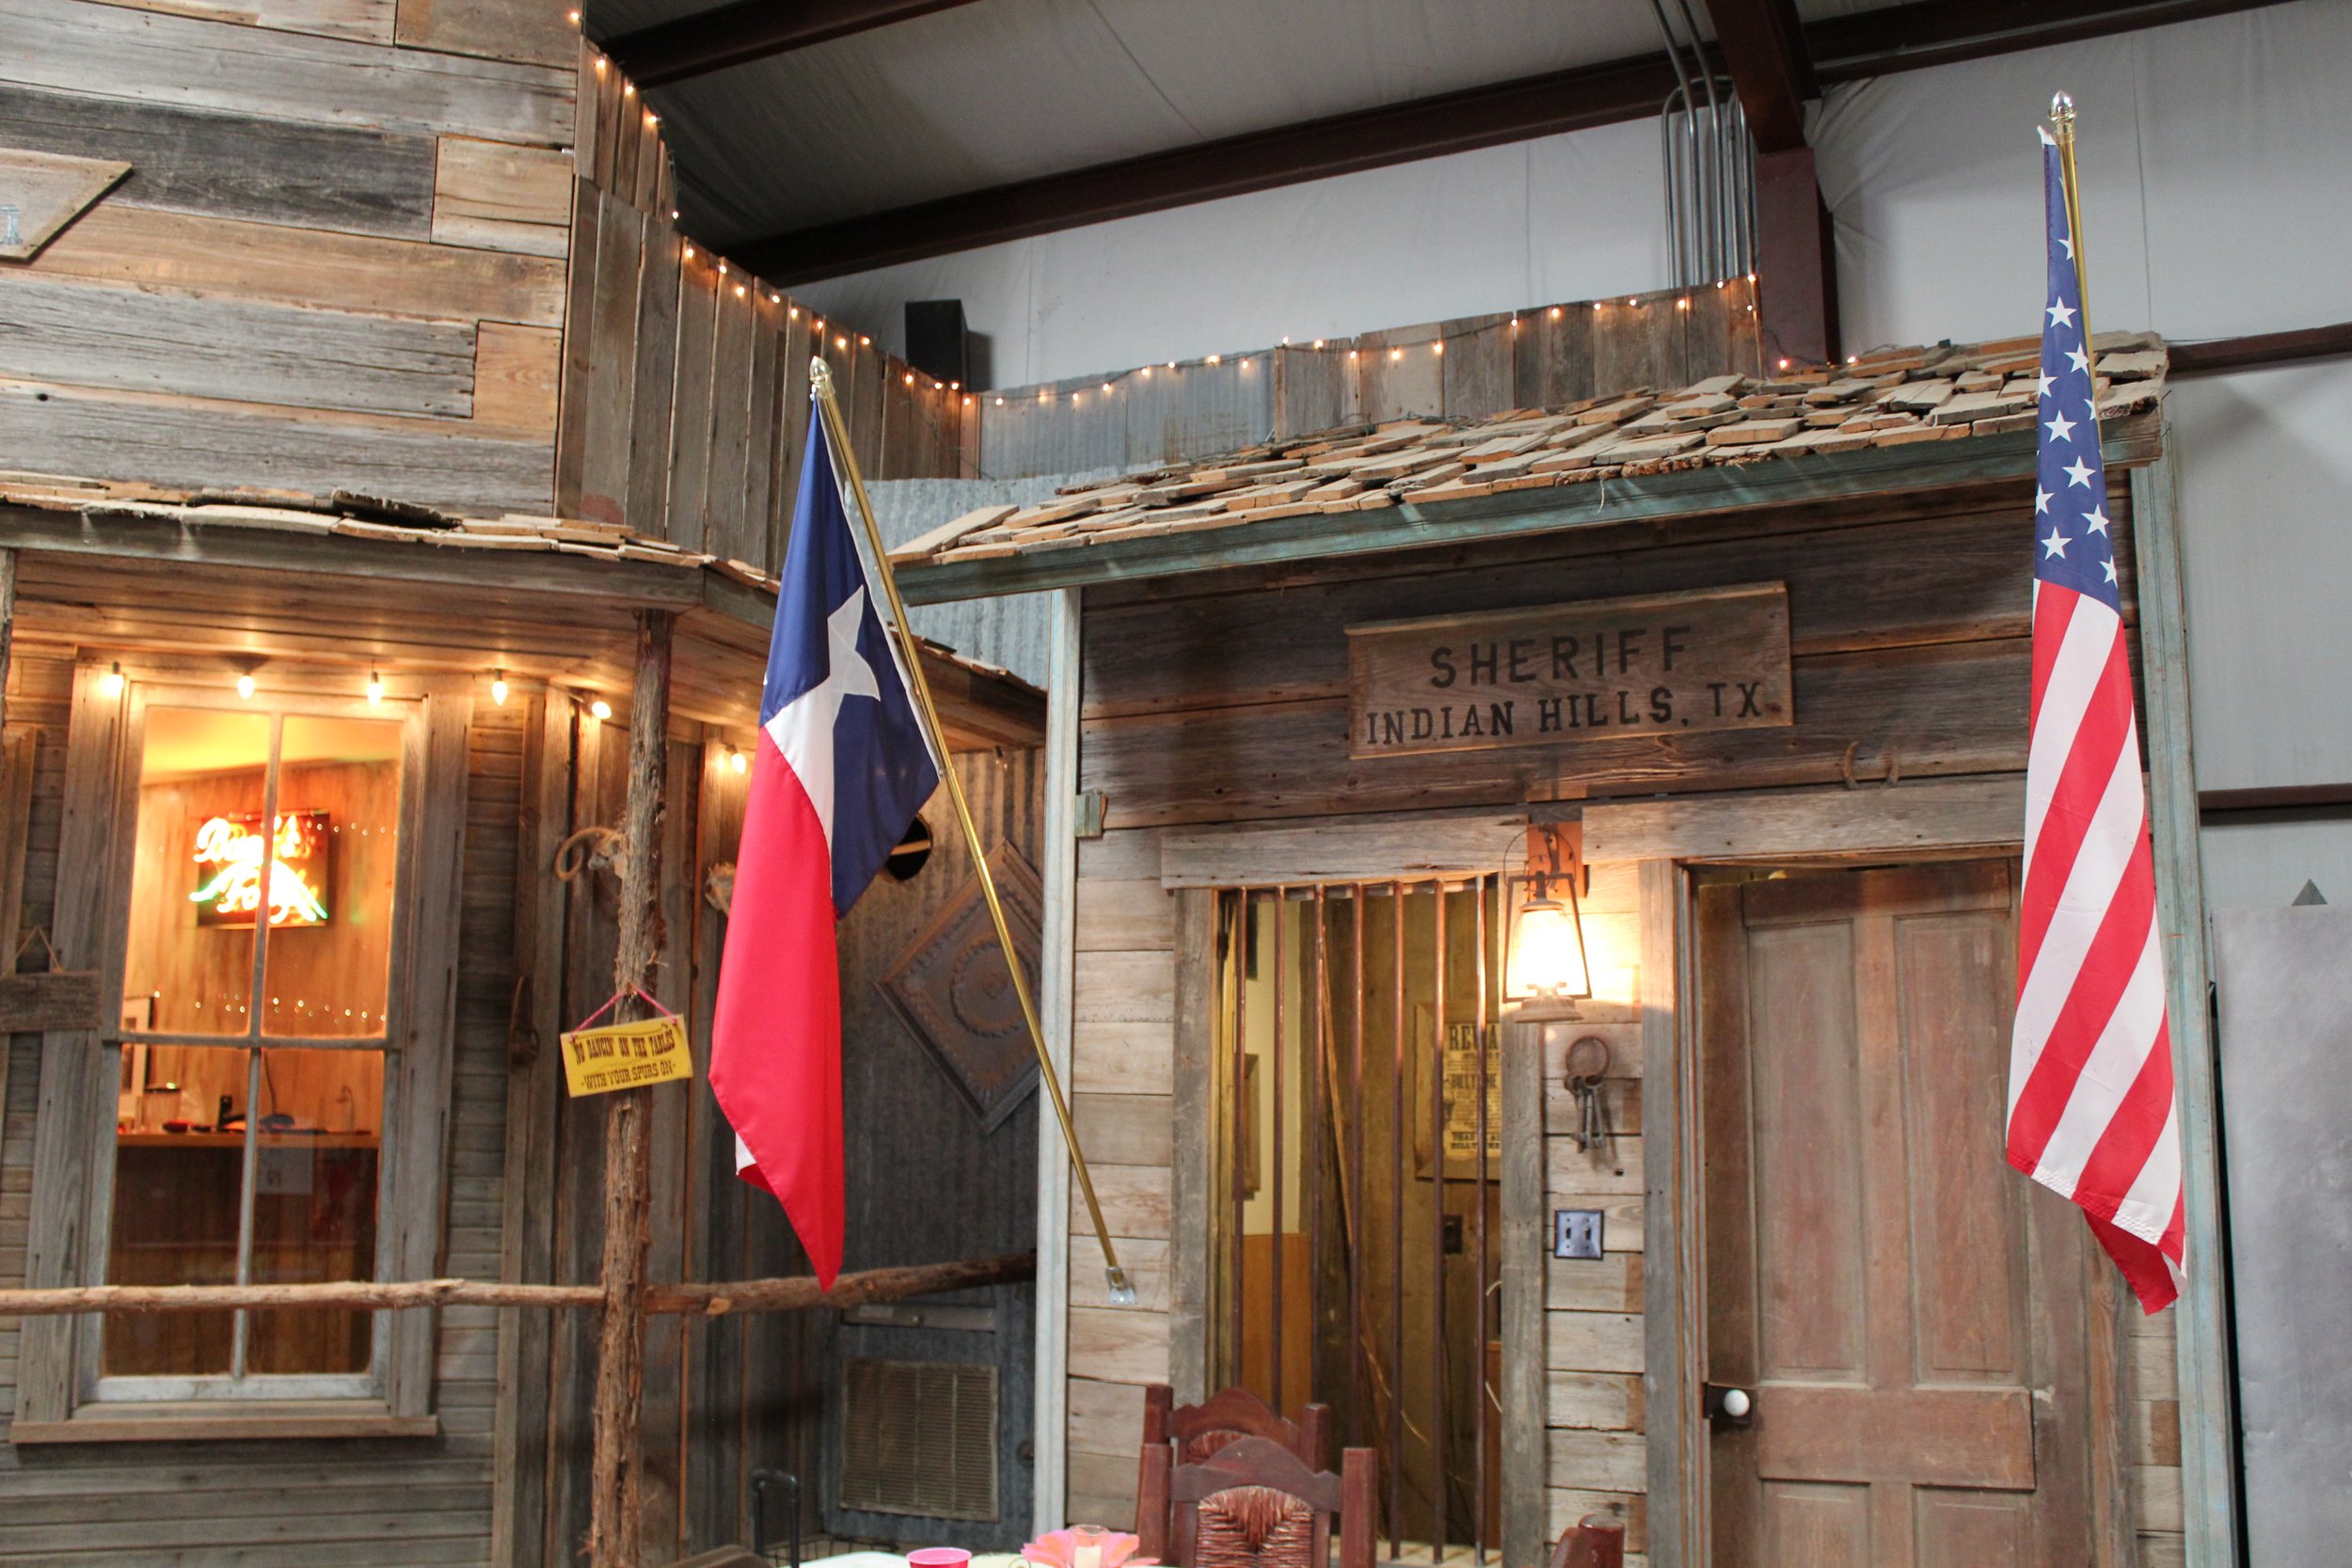 Party barn, Texas style-sheriff-indian-hills.JPG